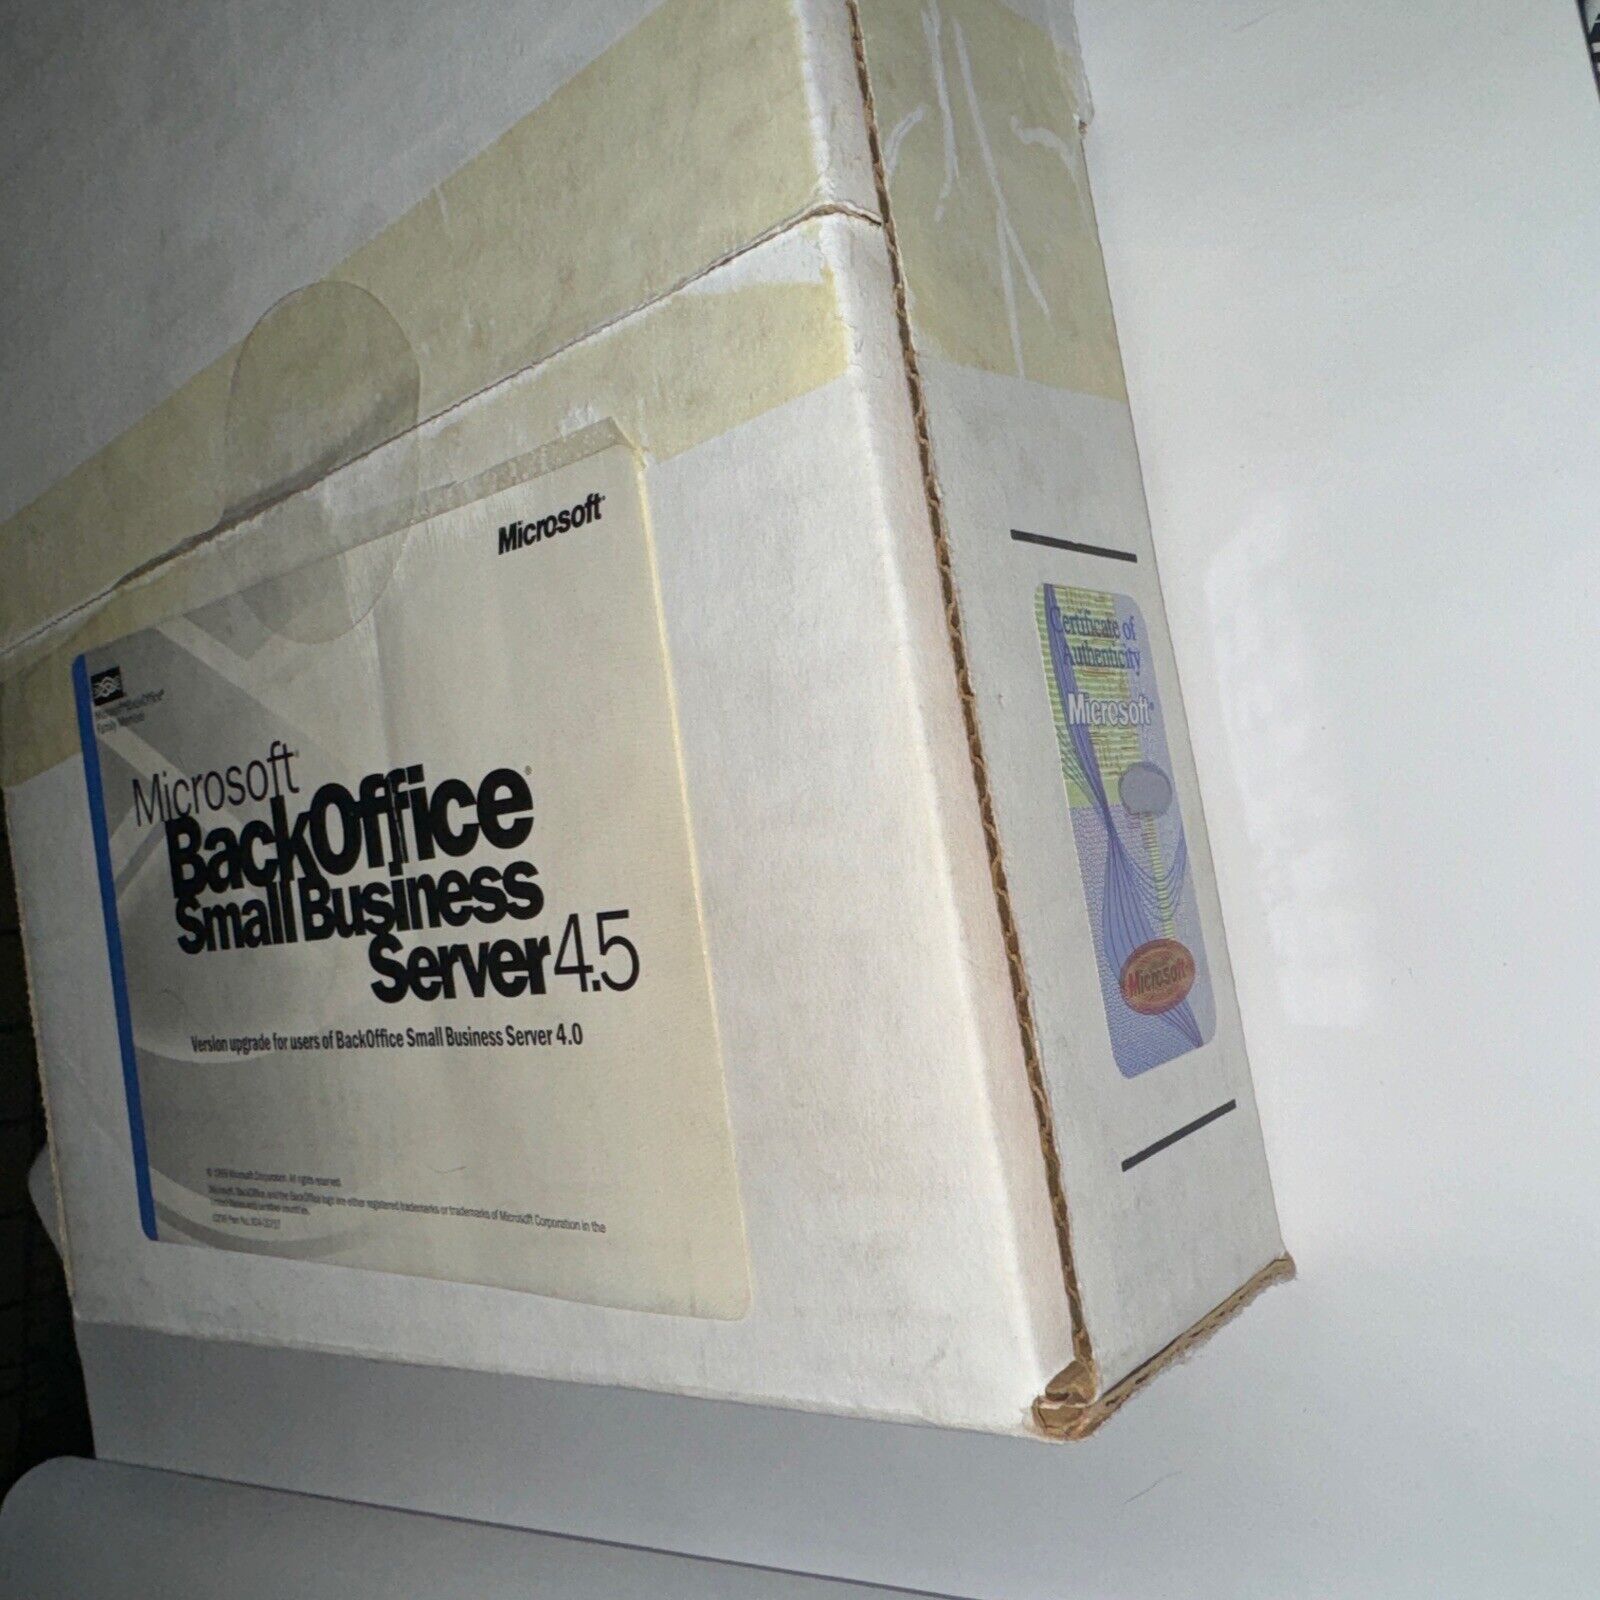 Microsoft Backoffice Small  Bussiness Server 4.5 Upgrade & Microsoft Outlook